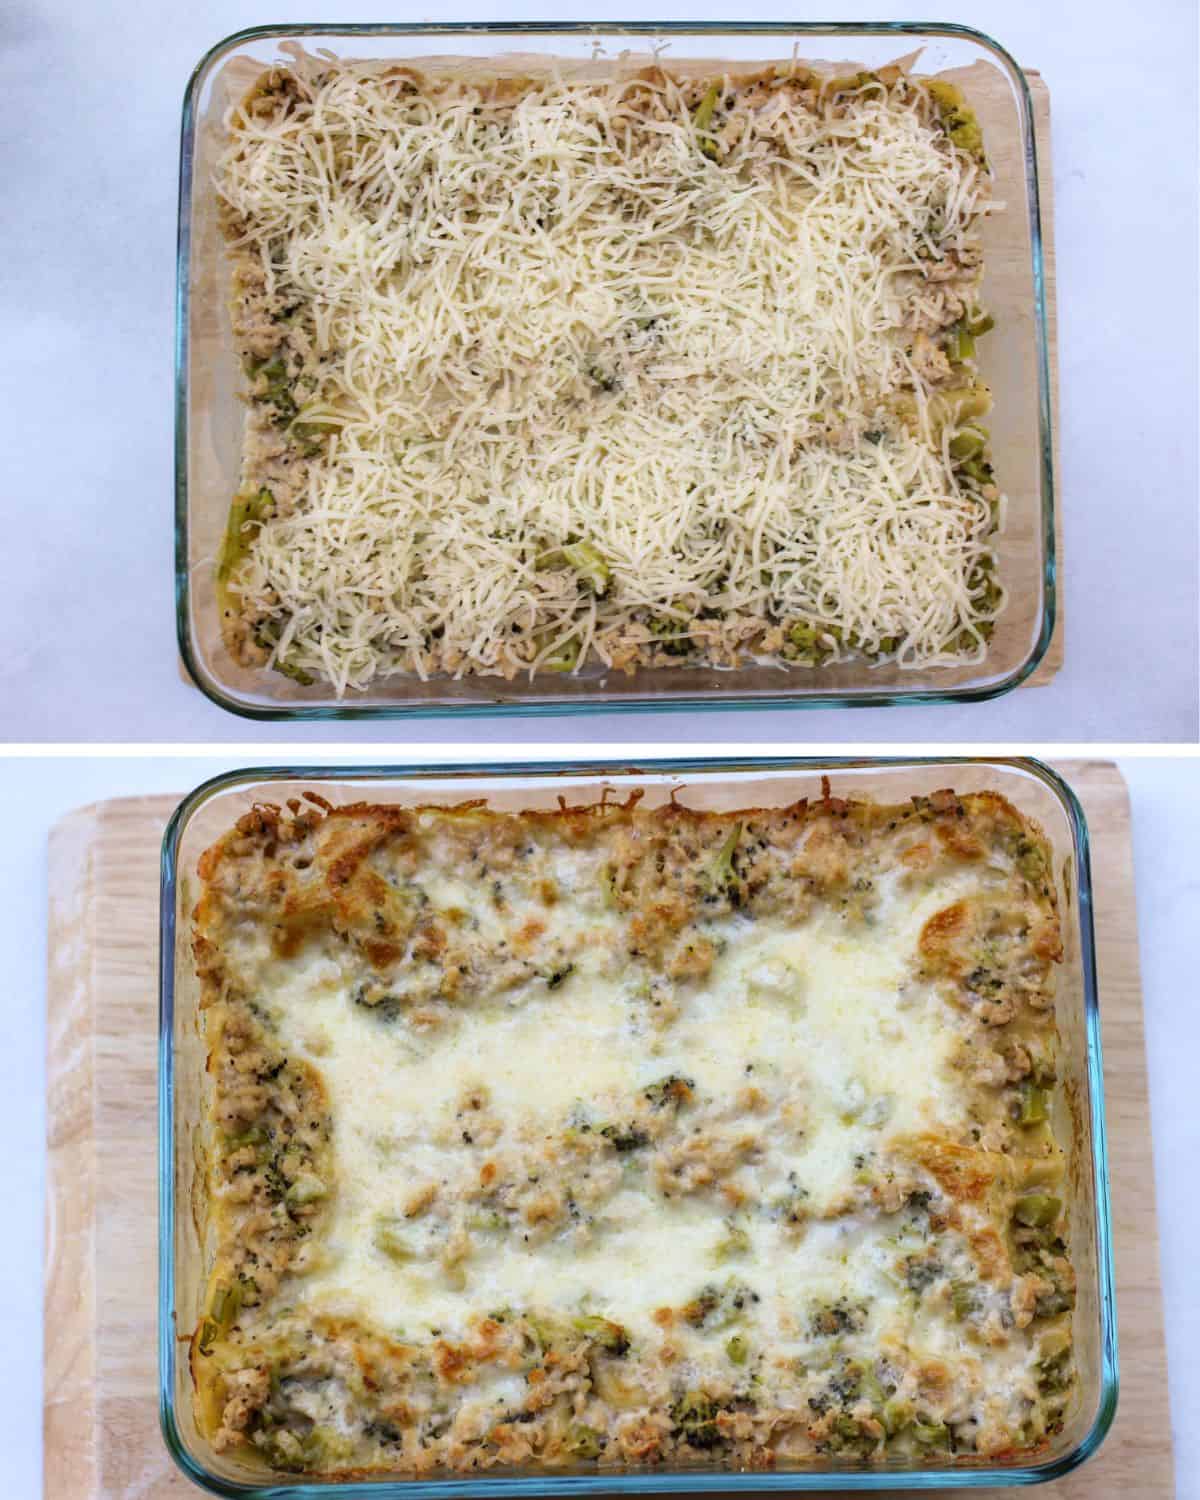 A glass rectangular casserole dish with creamy lasagna topped with freshly shredded white cheese on top. Te cheese melted after baking in the bottom image.